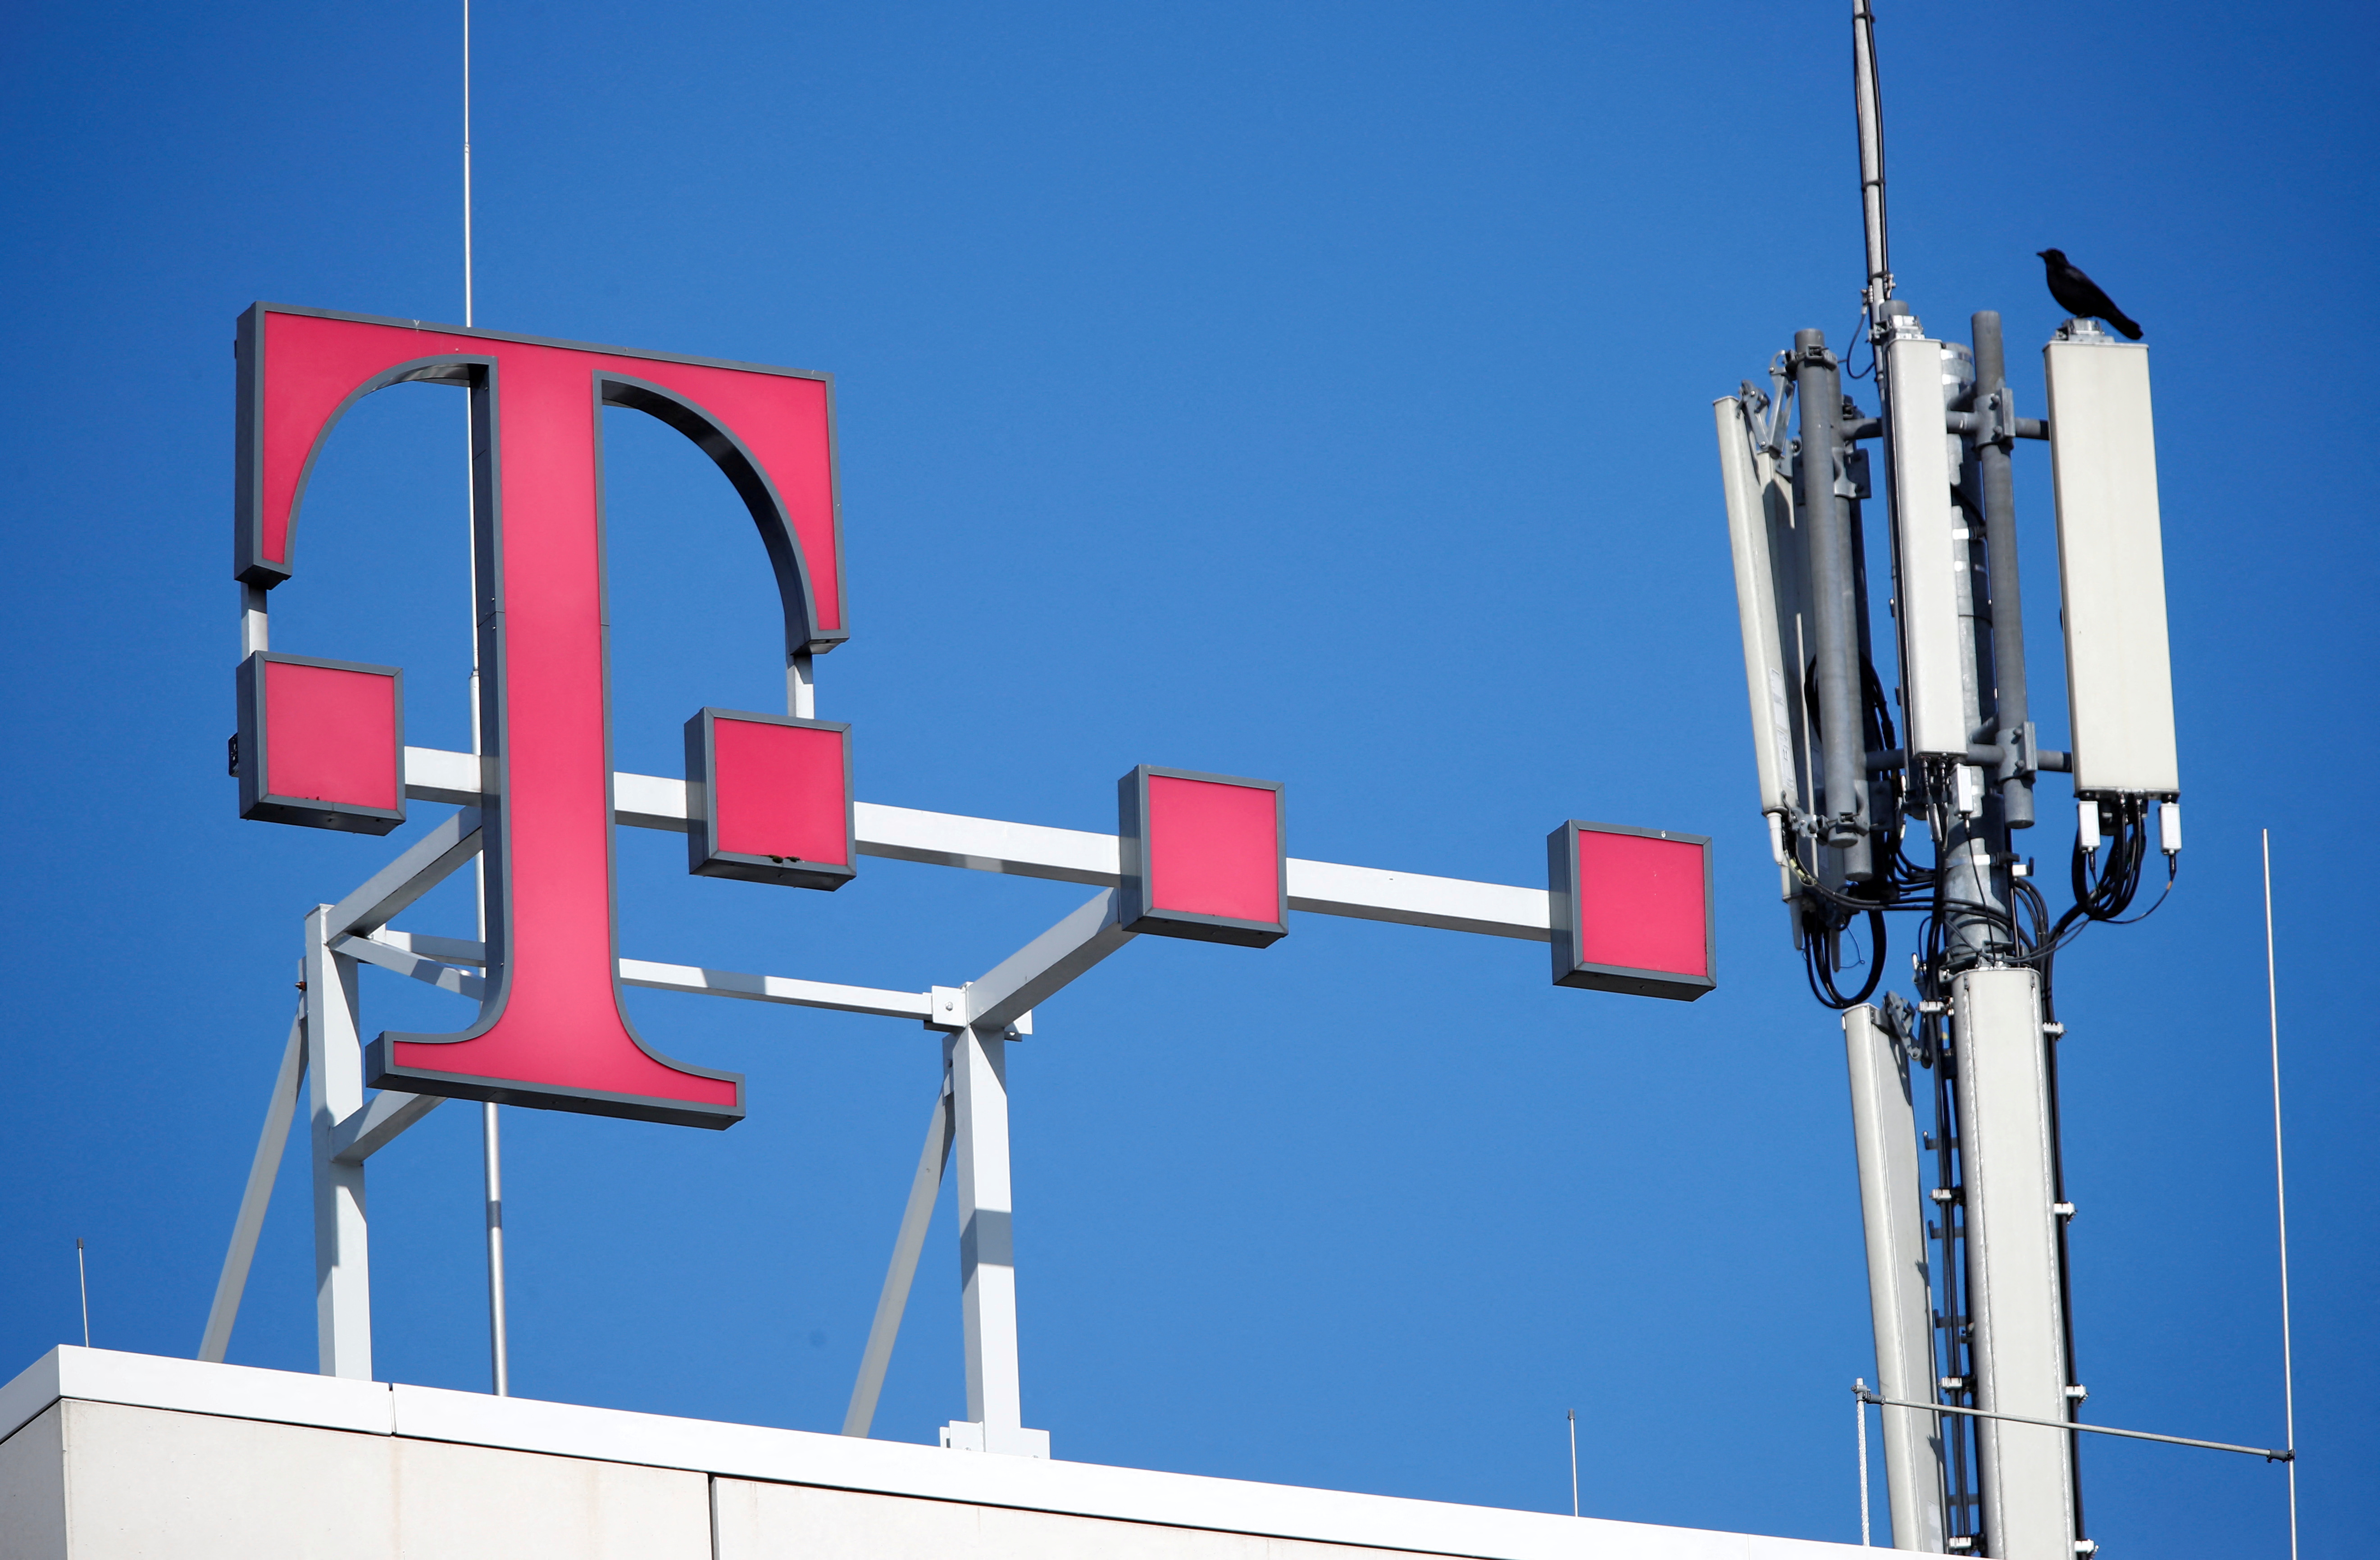 The logo of German telecoms giant Deutsche Telekom and GSM antennas are seen atop the company's headquarters in Bonn